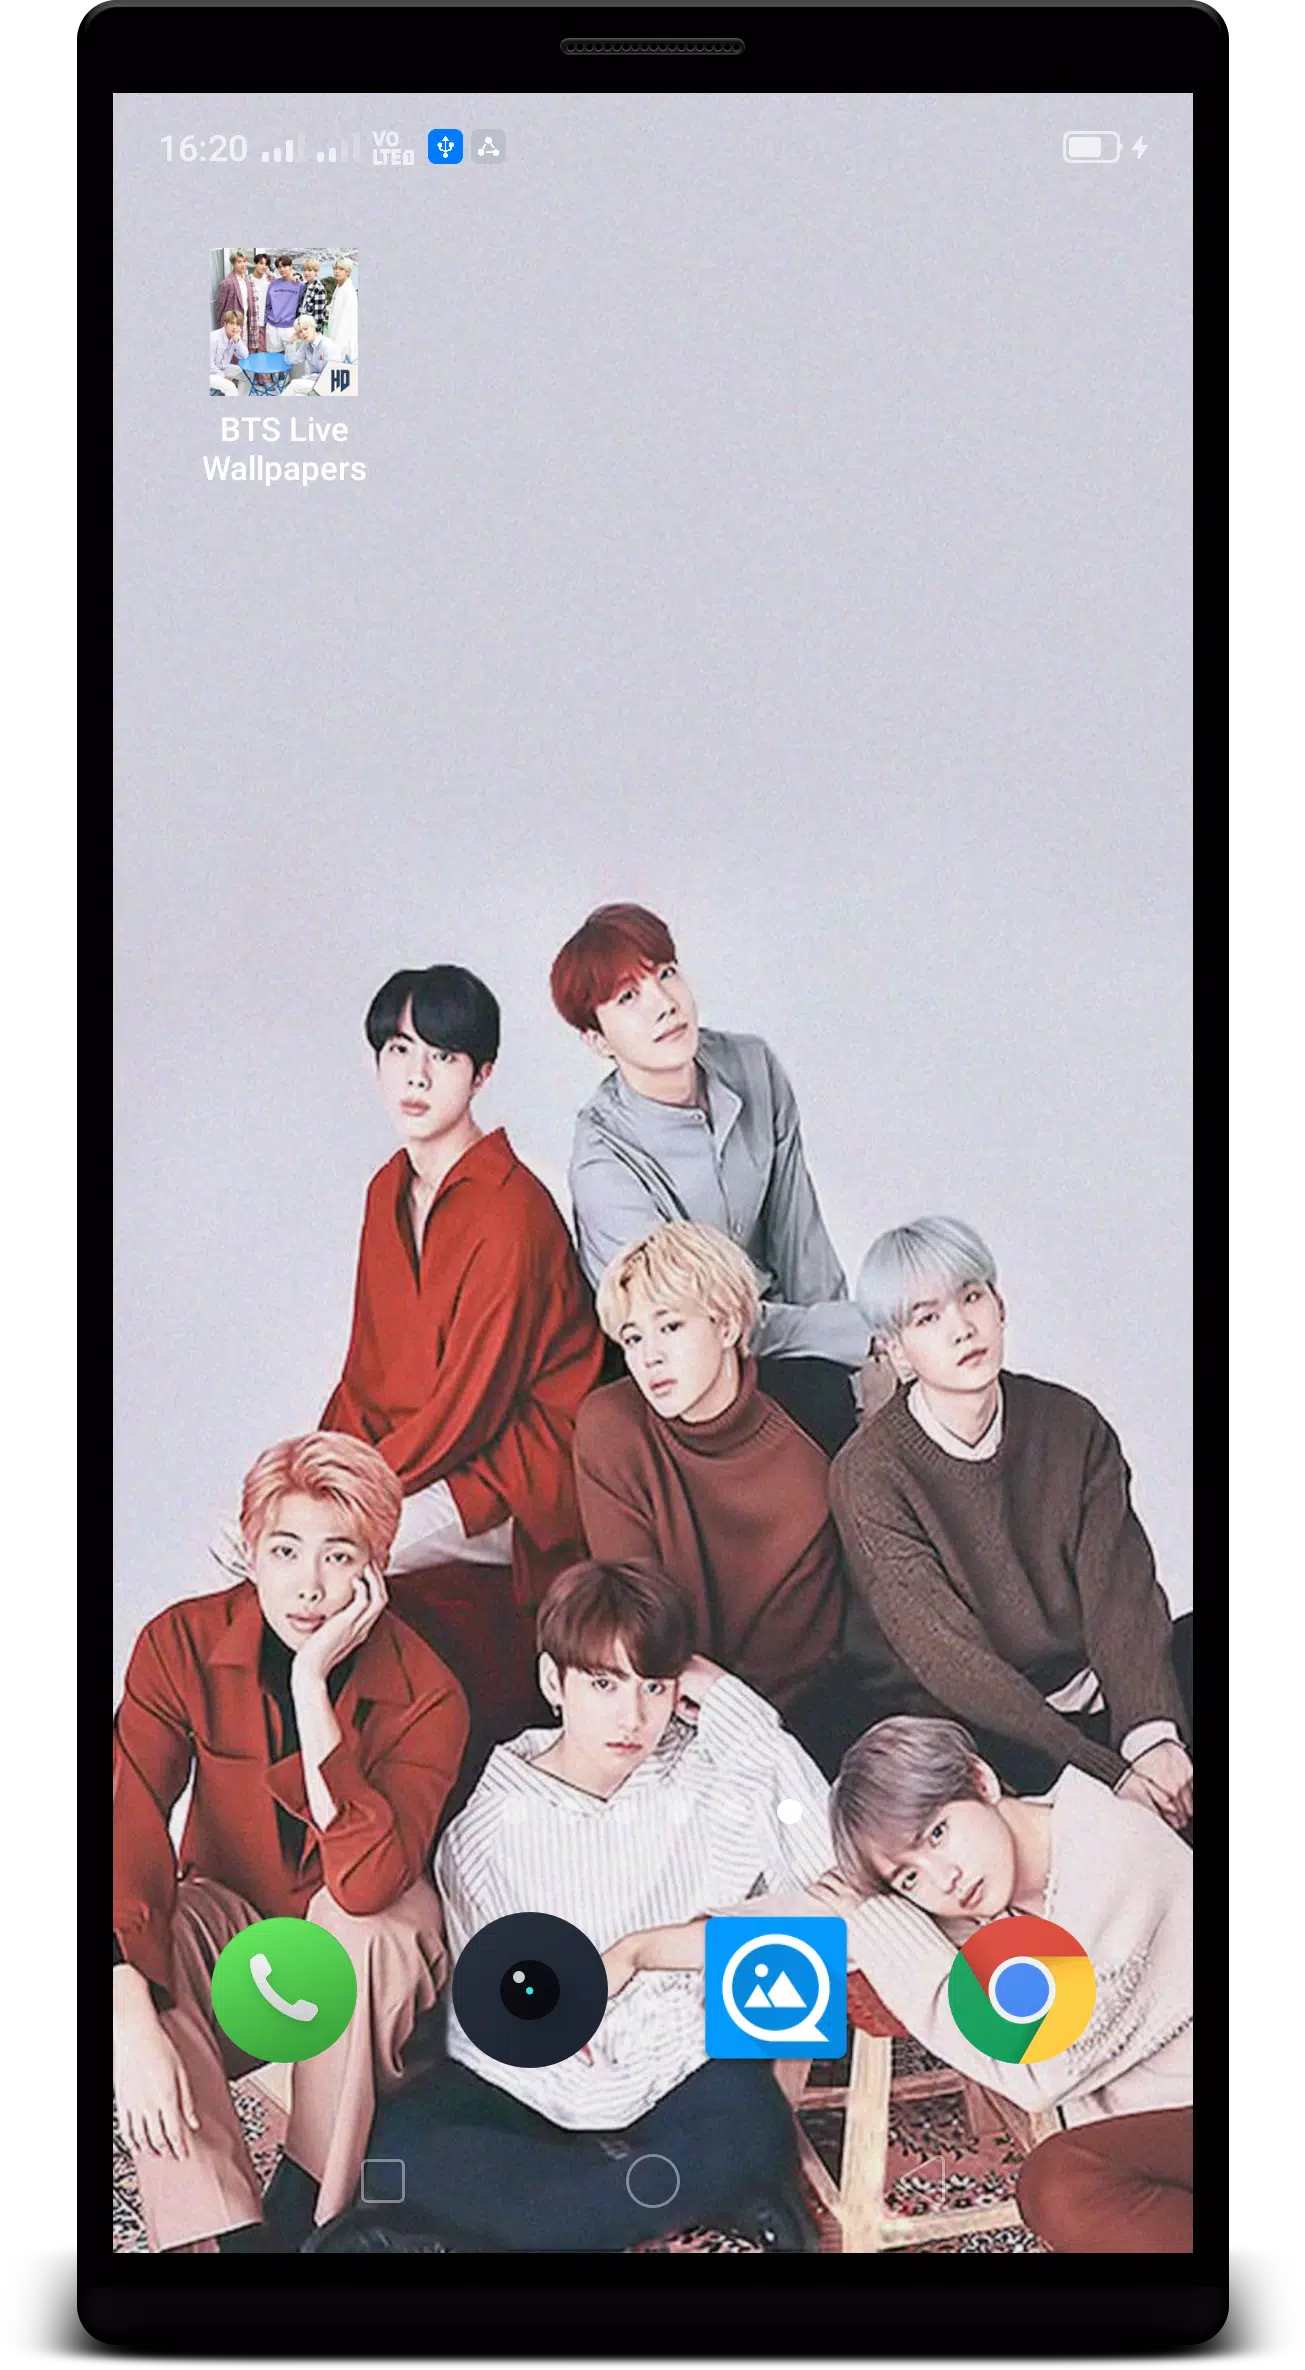 Download BTS Live Wallpaper HD, 4K APK for Android, Run on PC and Mac